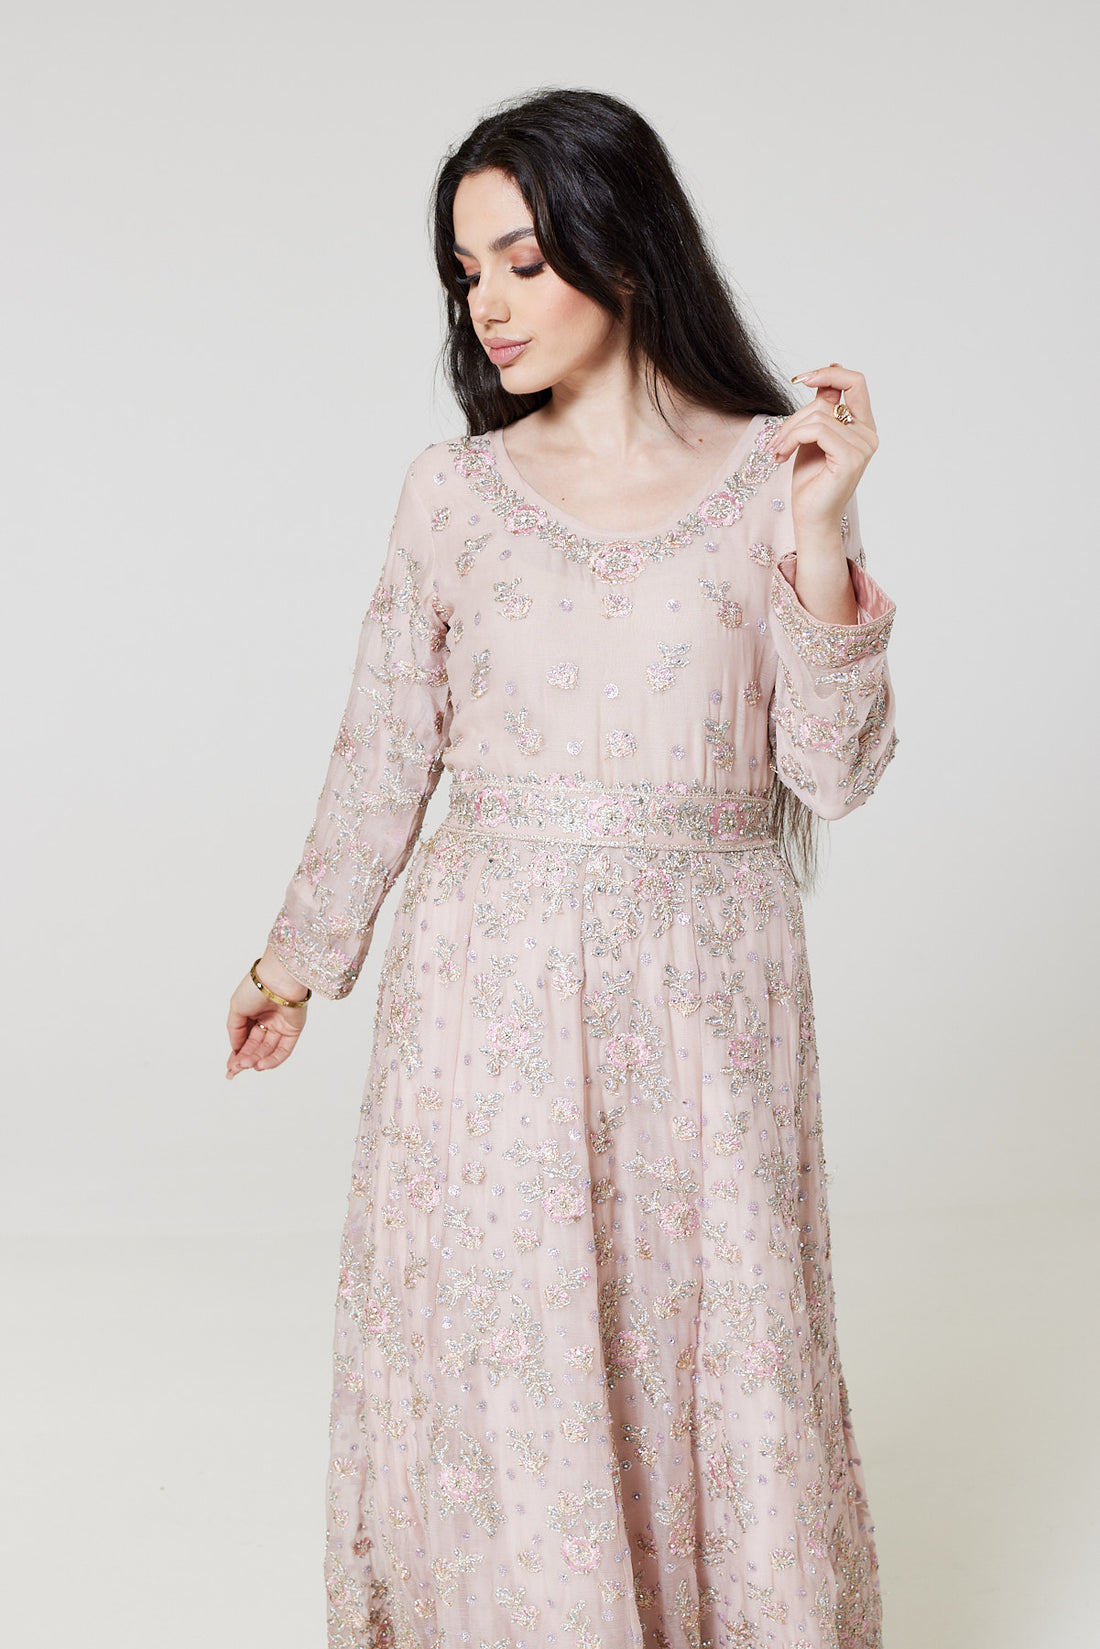 Tea Pink Embroidered Chiffon Suit TP1625